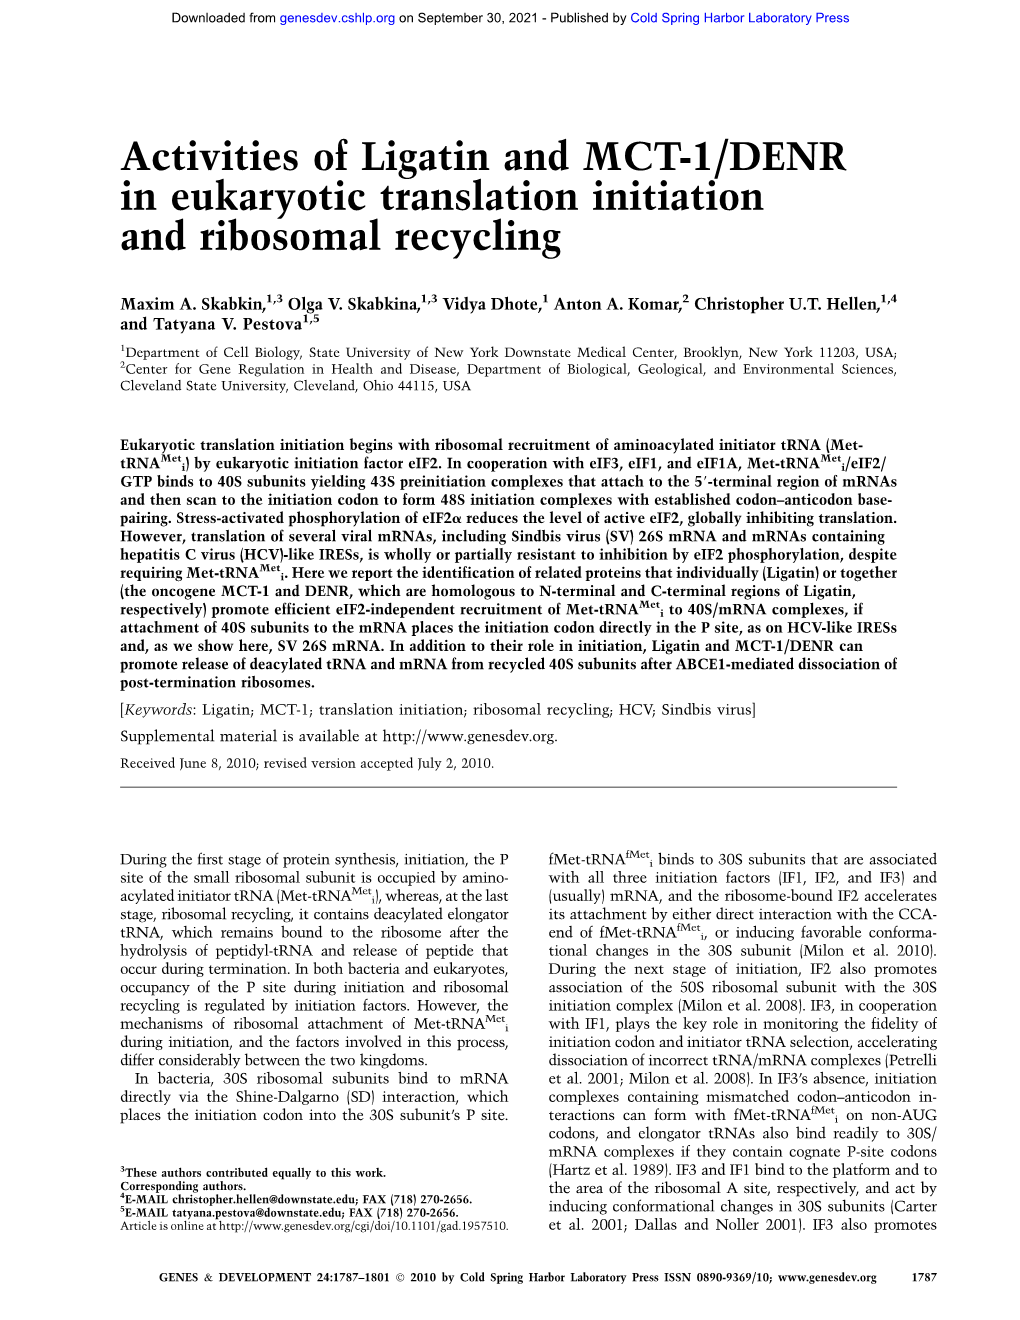 Activities of Ligatin and MCT-1/DENR in Eukaryotic Translation Initiation and Ribosomal Recycling